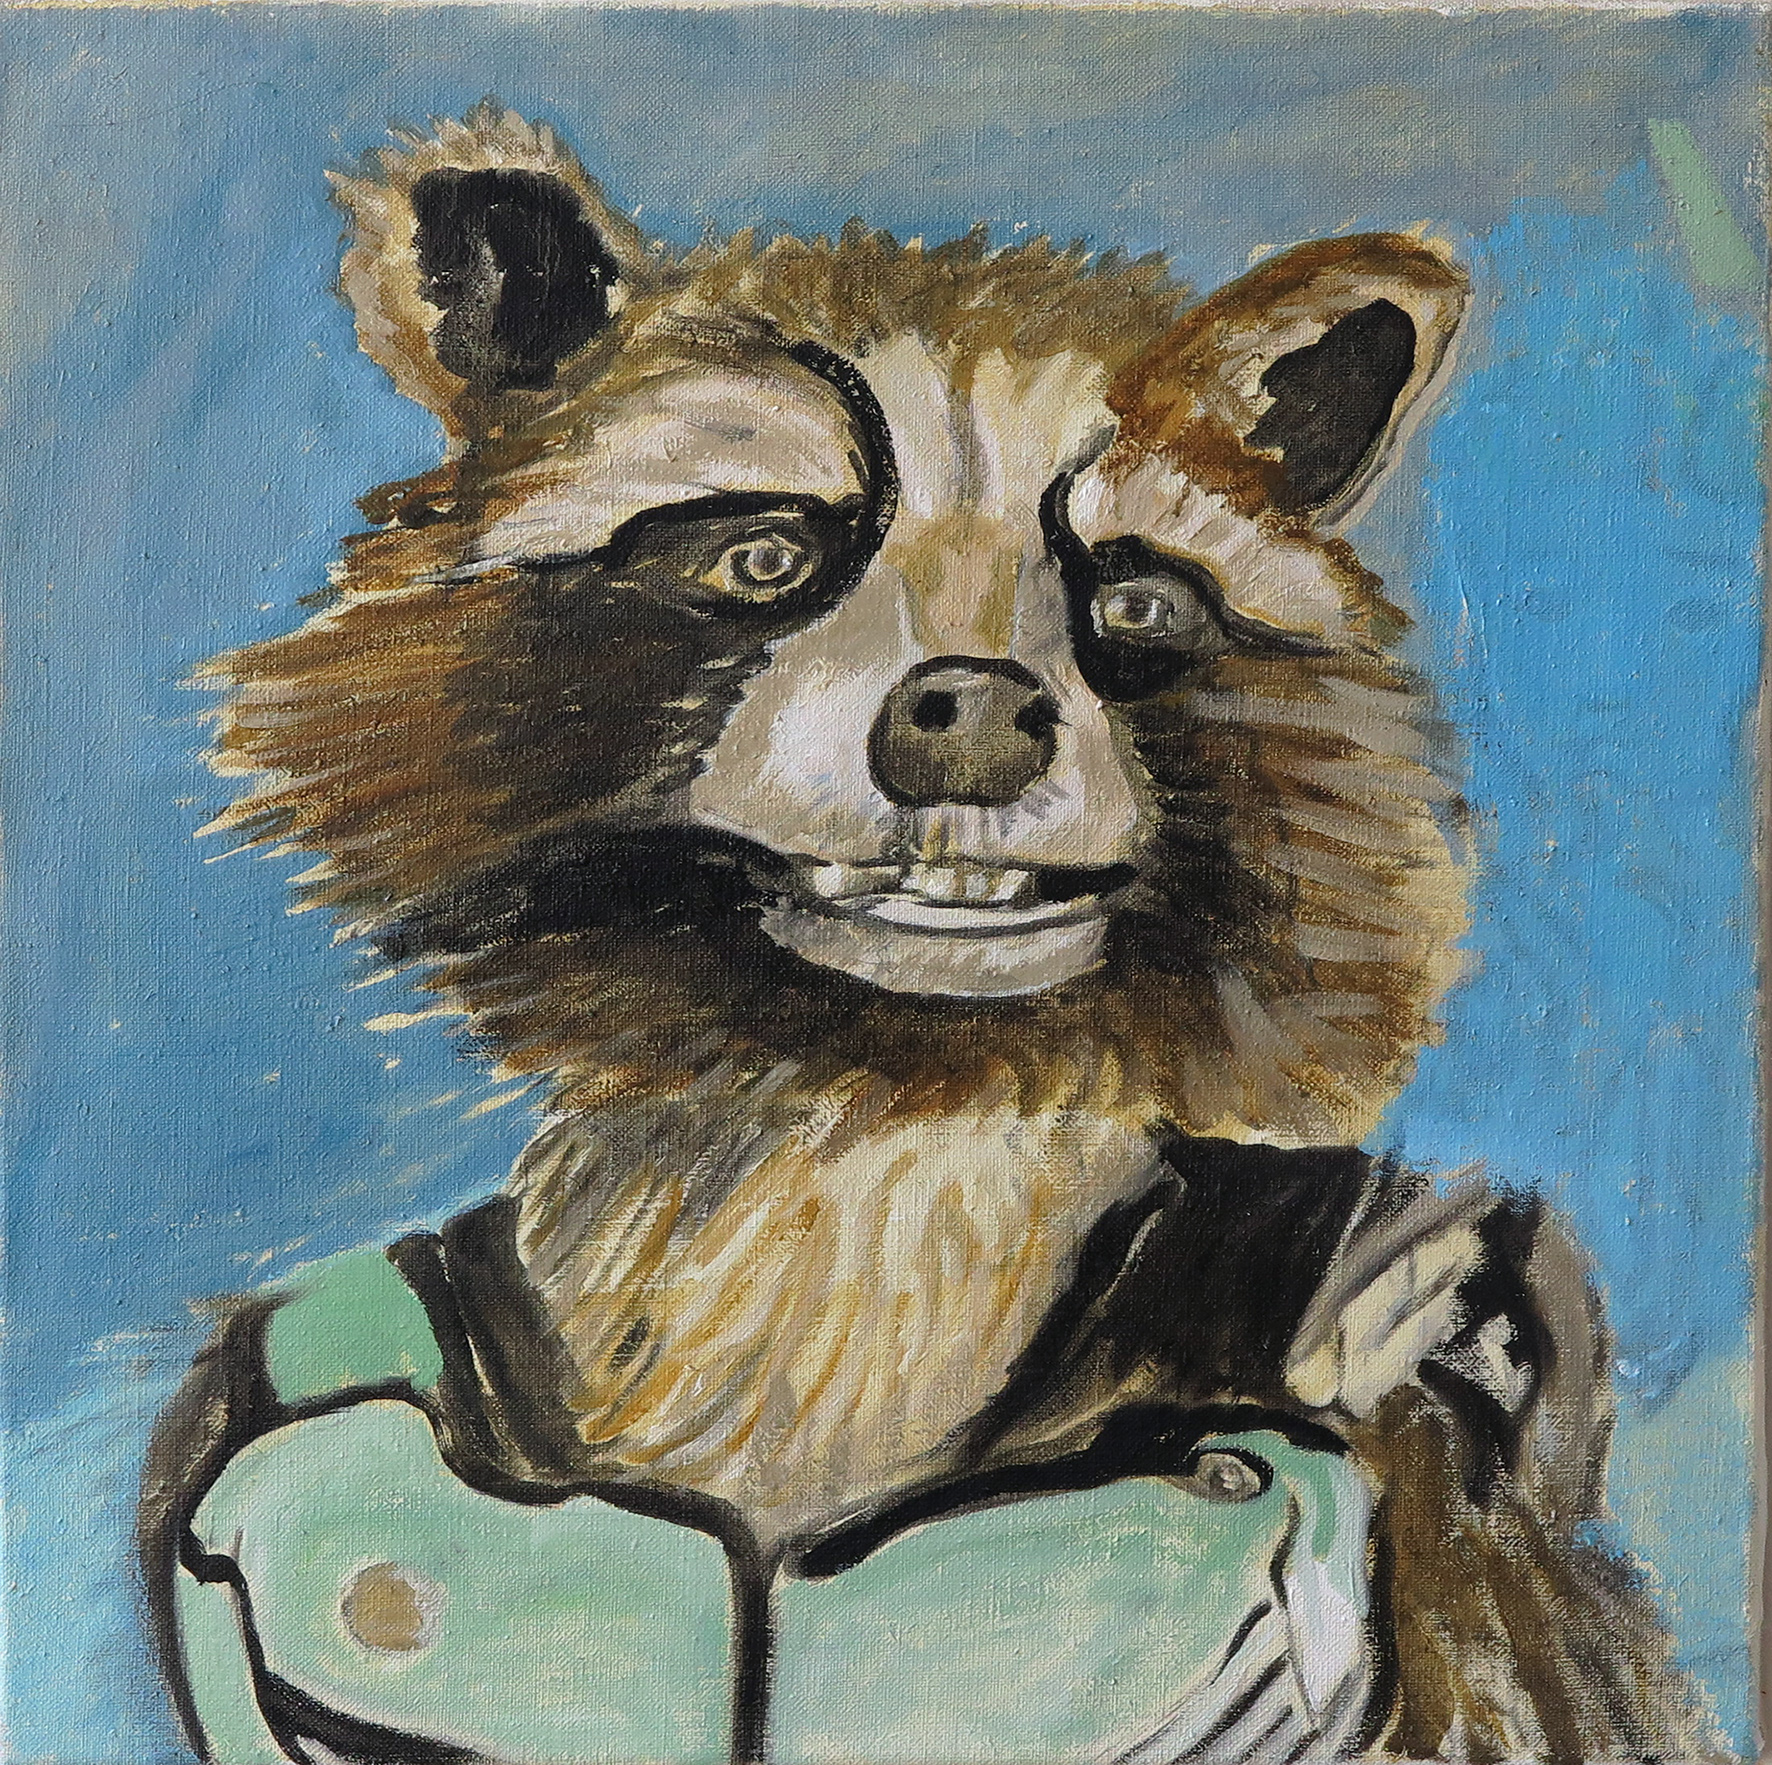 You can see a painted picture of a raccoon wearing a light green doublet.